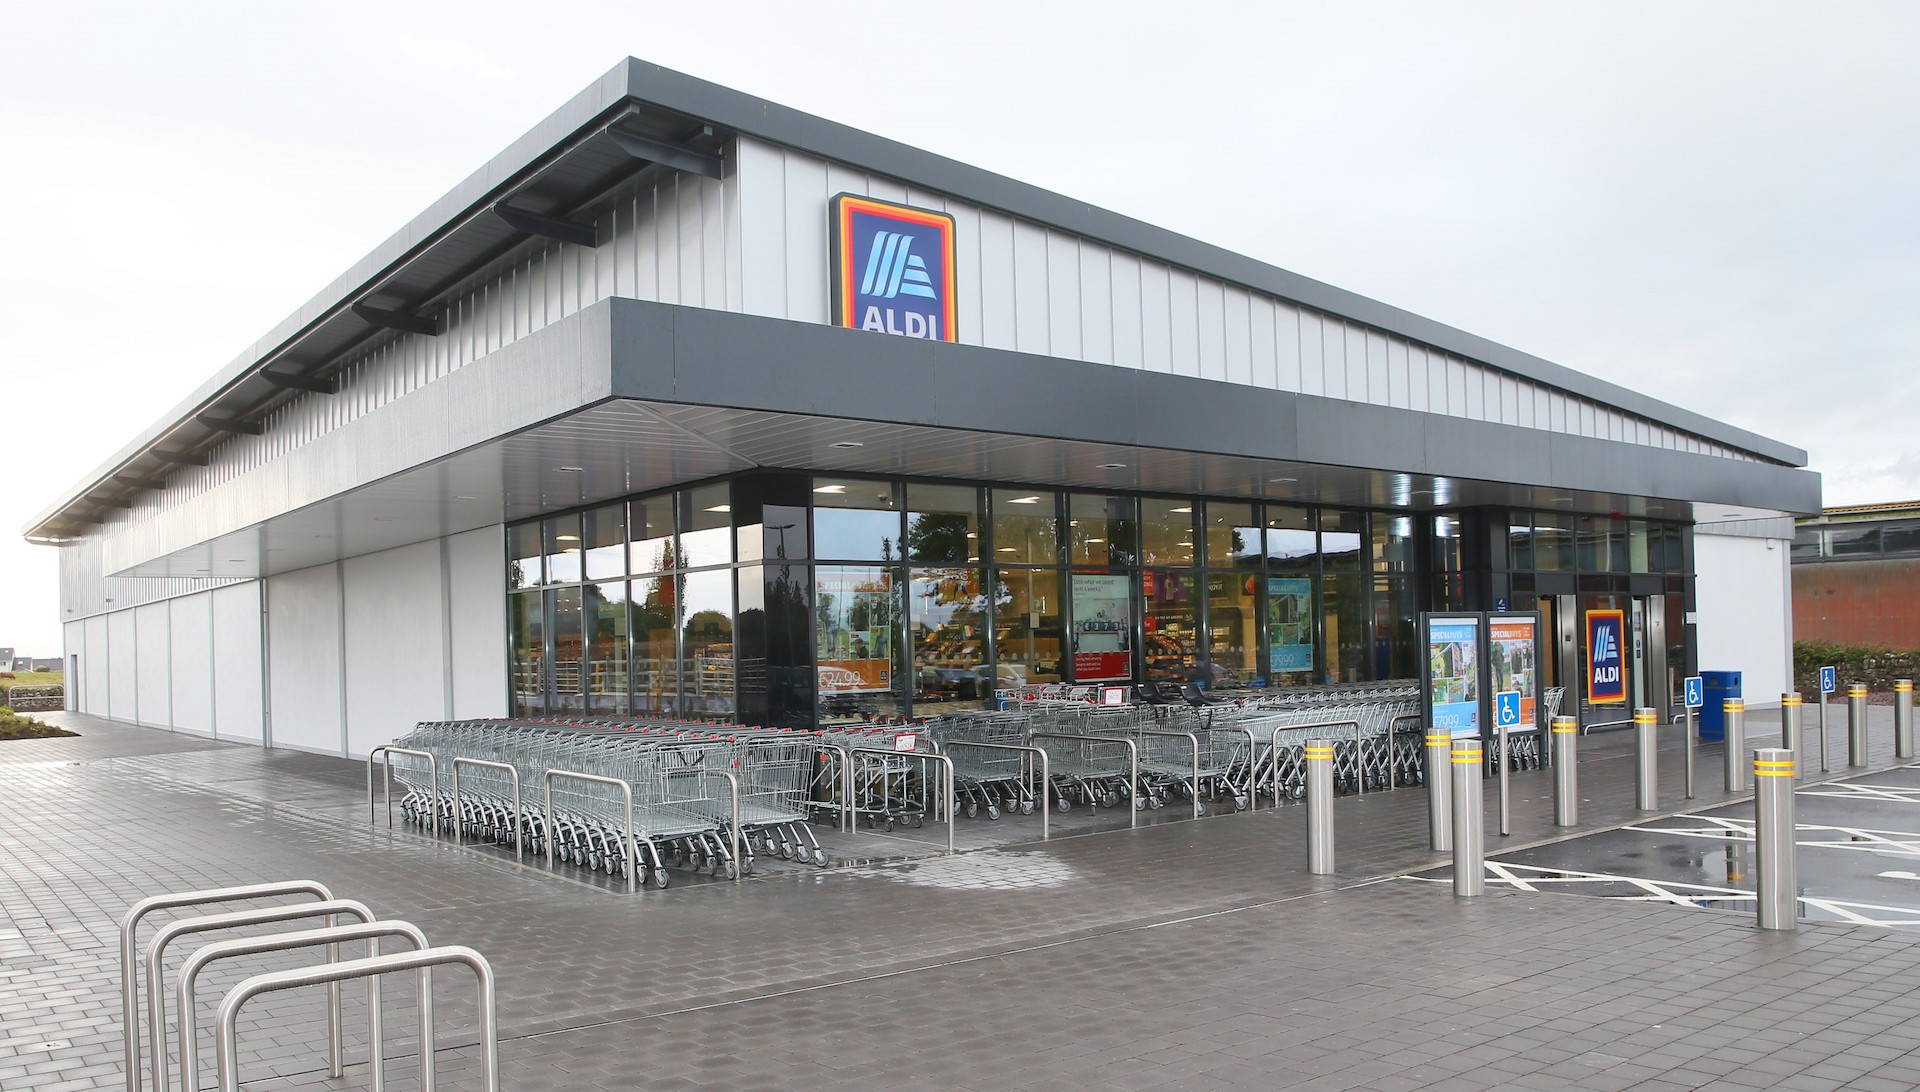 Aldi’s success continues with 12.8% growth